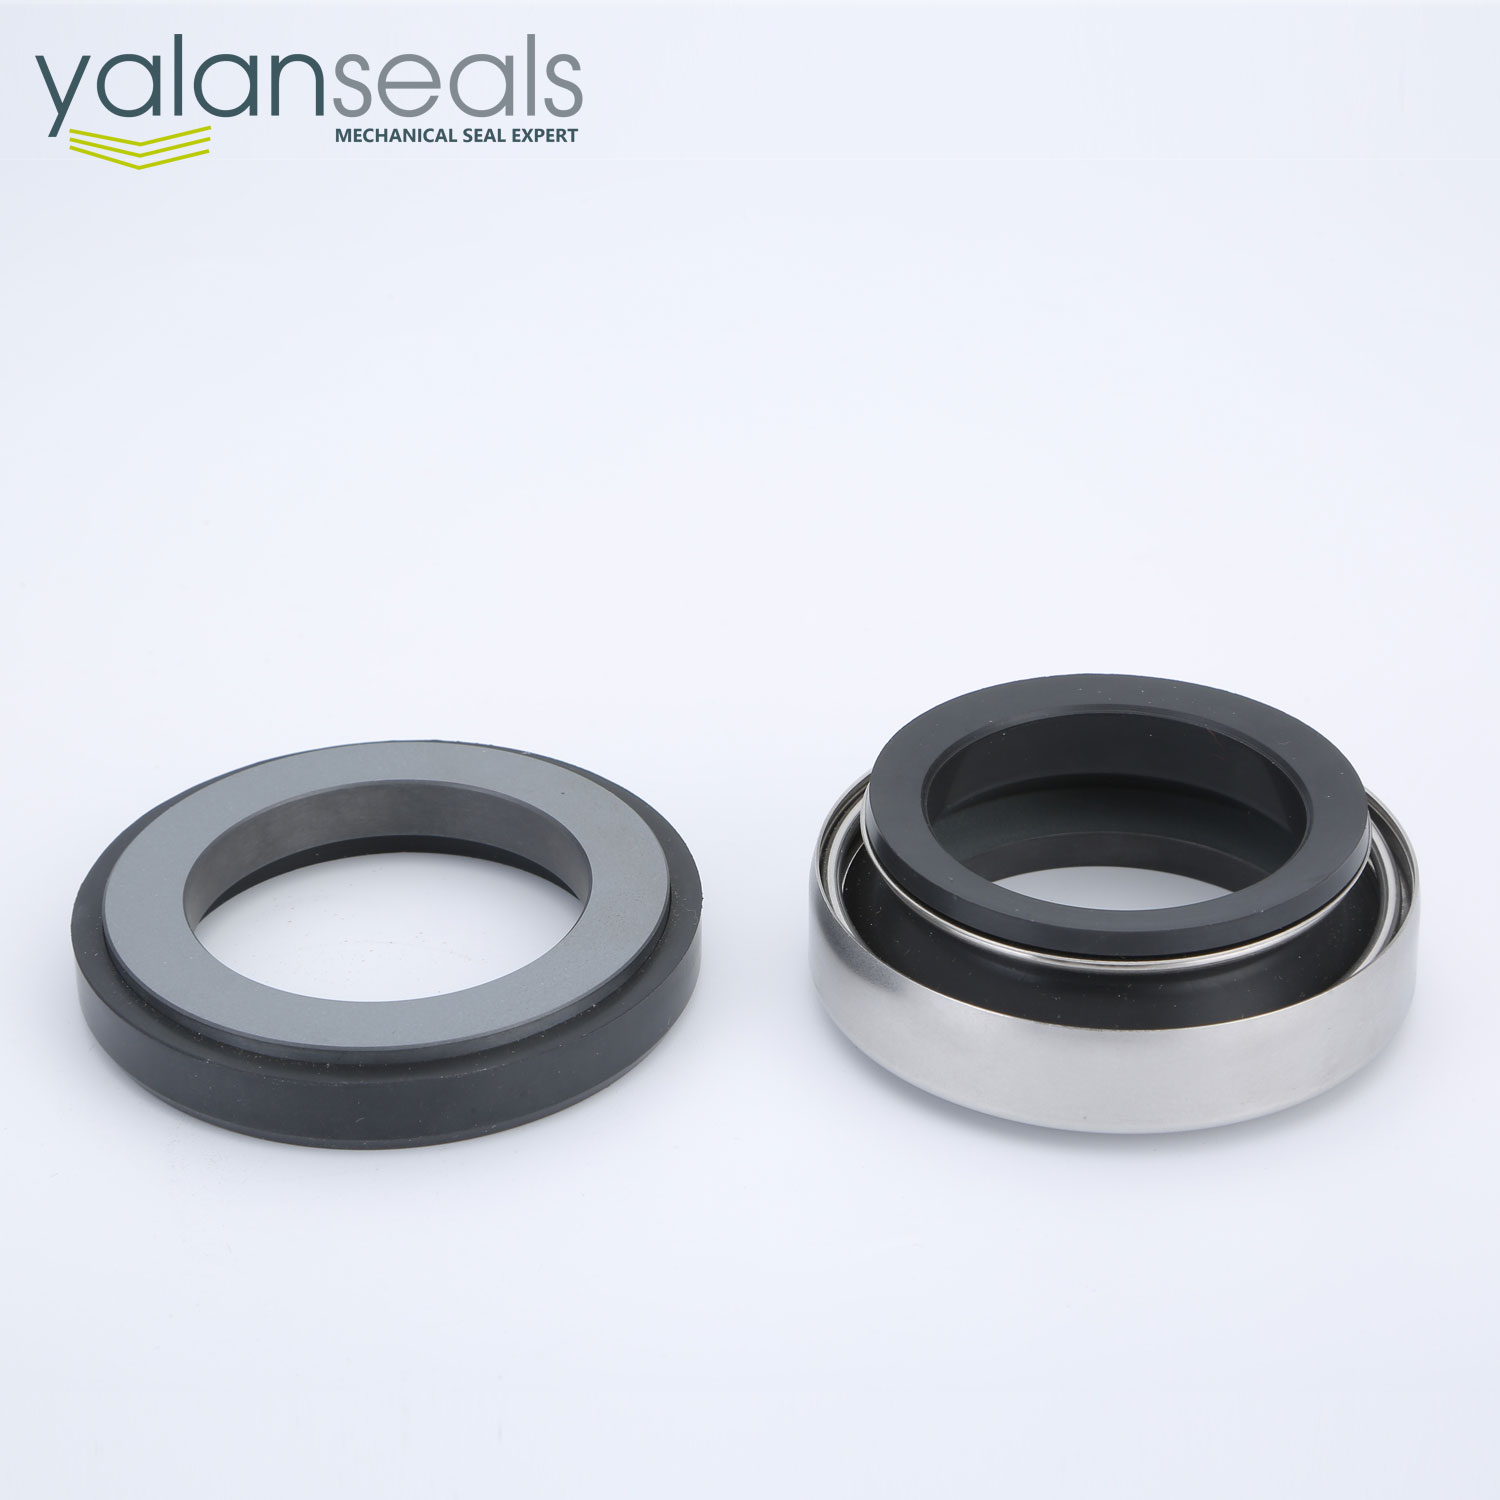 301 (BT-AR) Mechanical Seal for Piping Pumps and Clean Water Pumps